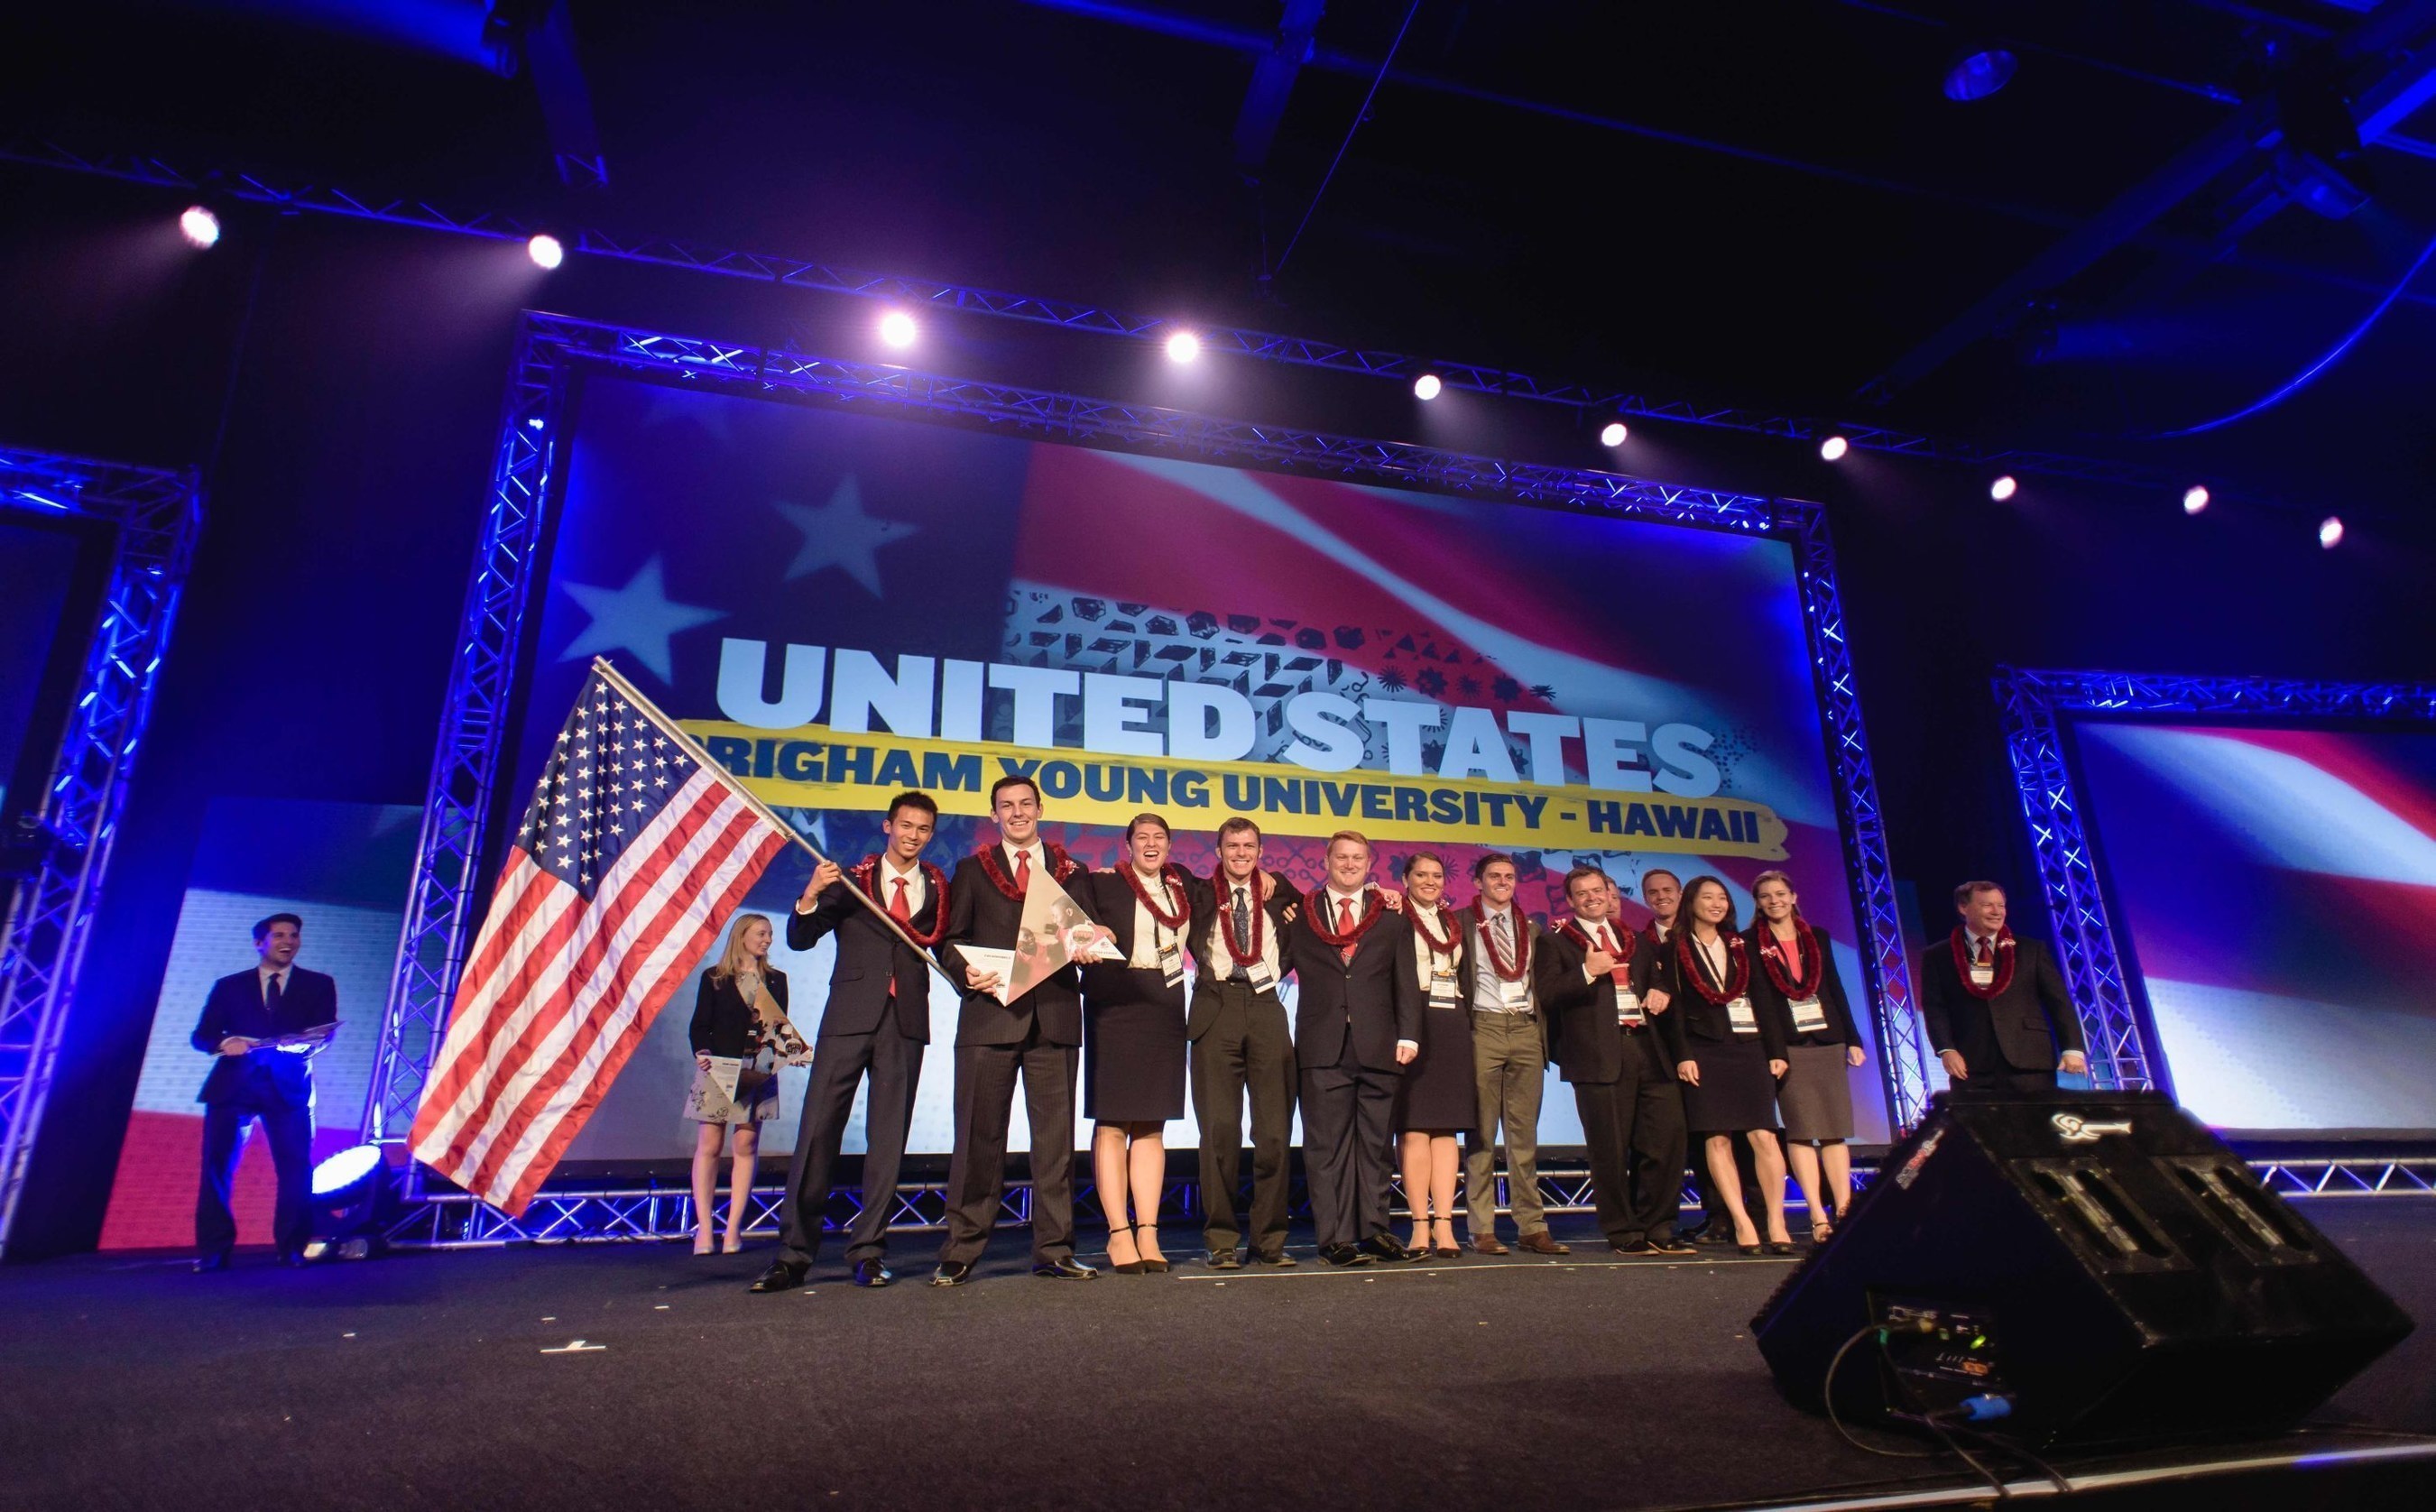 Enactus World Cup 2015 Team United States of America (PRNewsFoto/Enactus) (PRNewsFoto/Enactus)